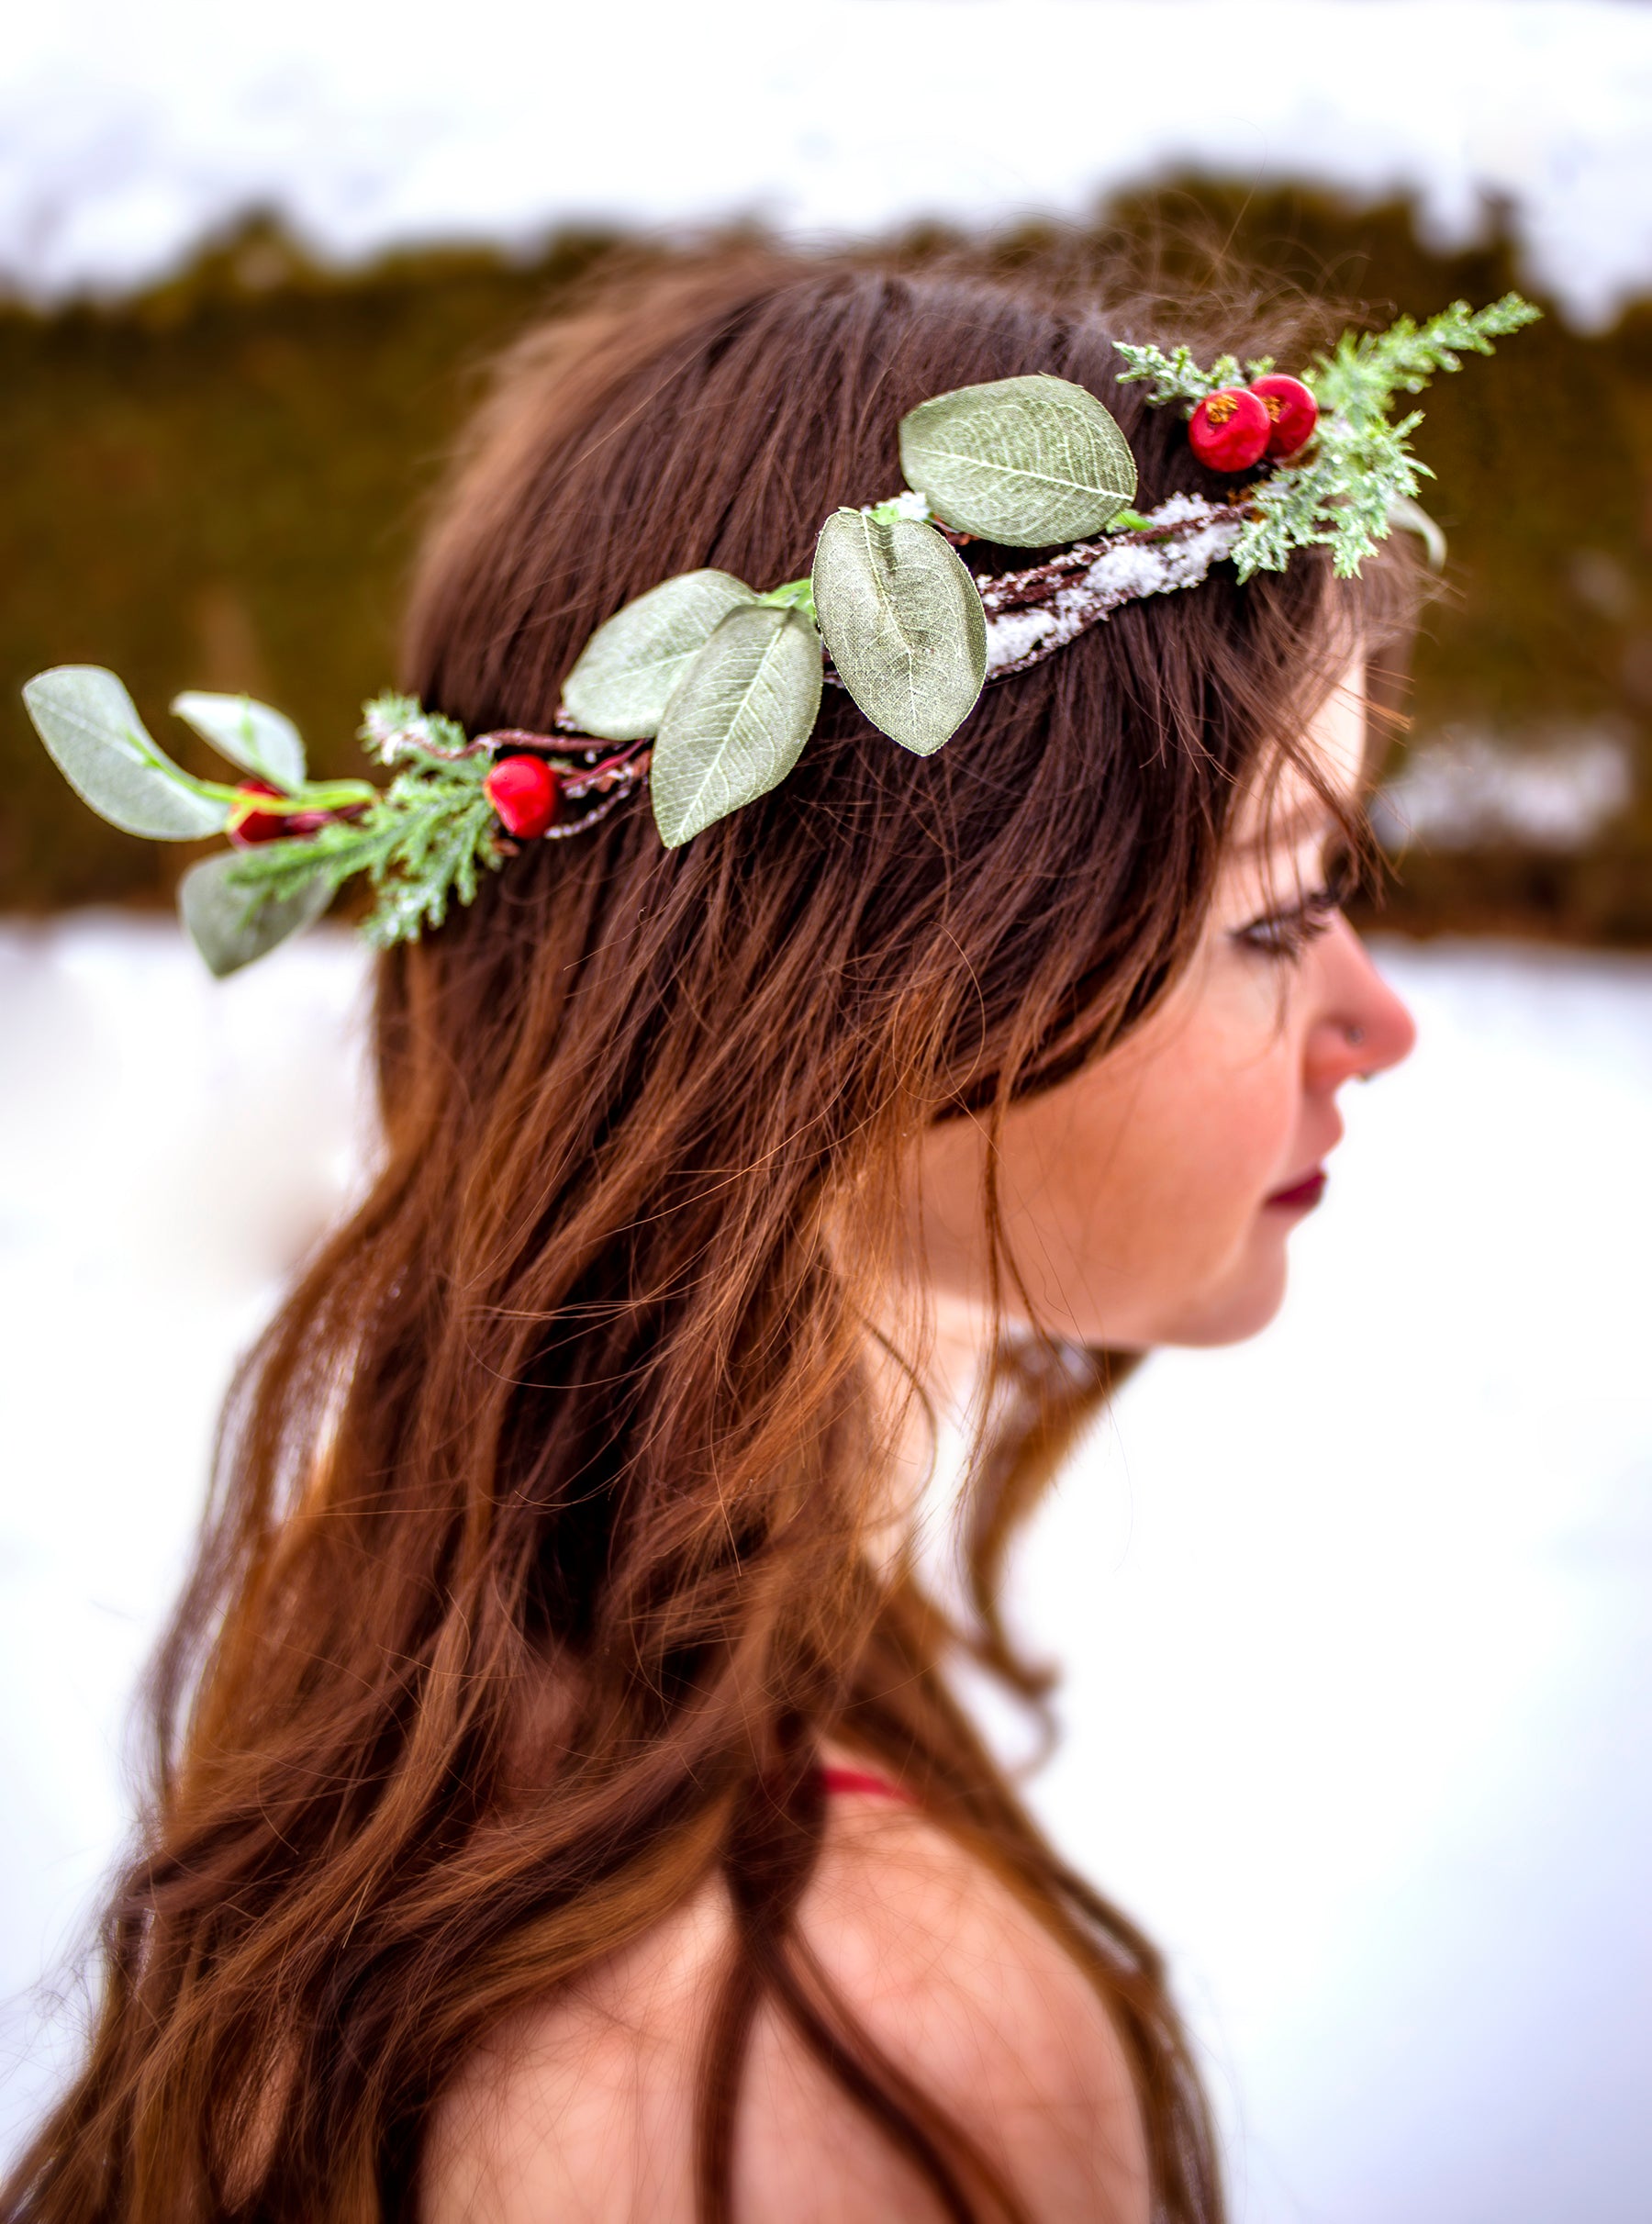 Snowy Winter Frosted Pine & Berry Crown